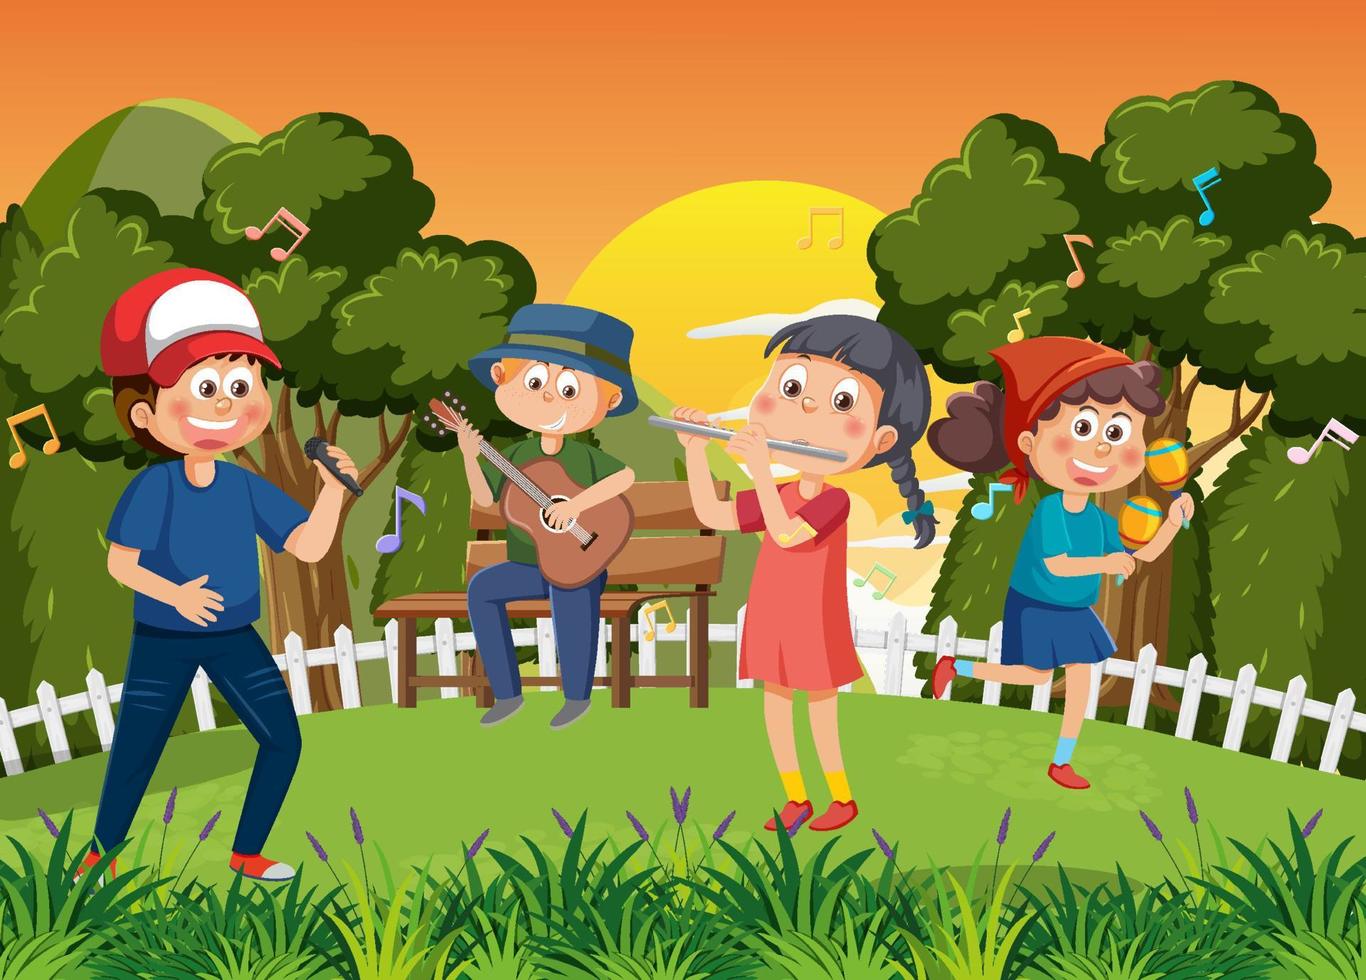 Children playing music in the park vector